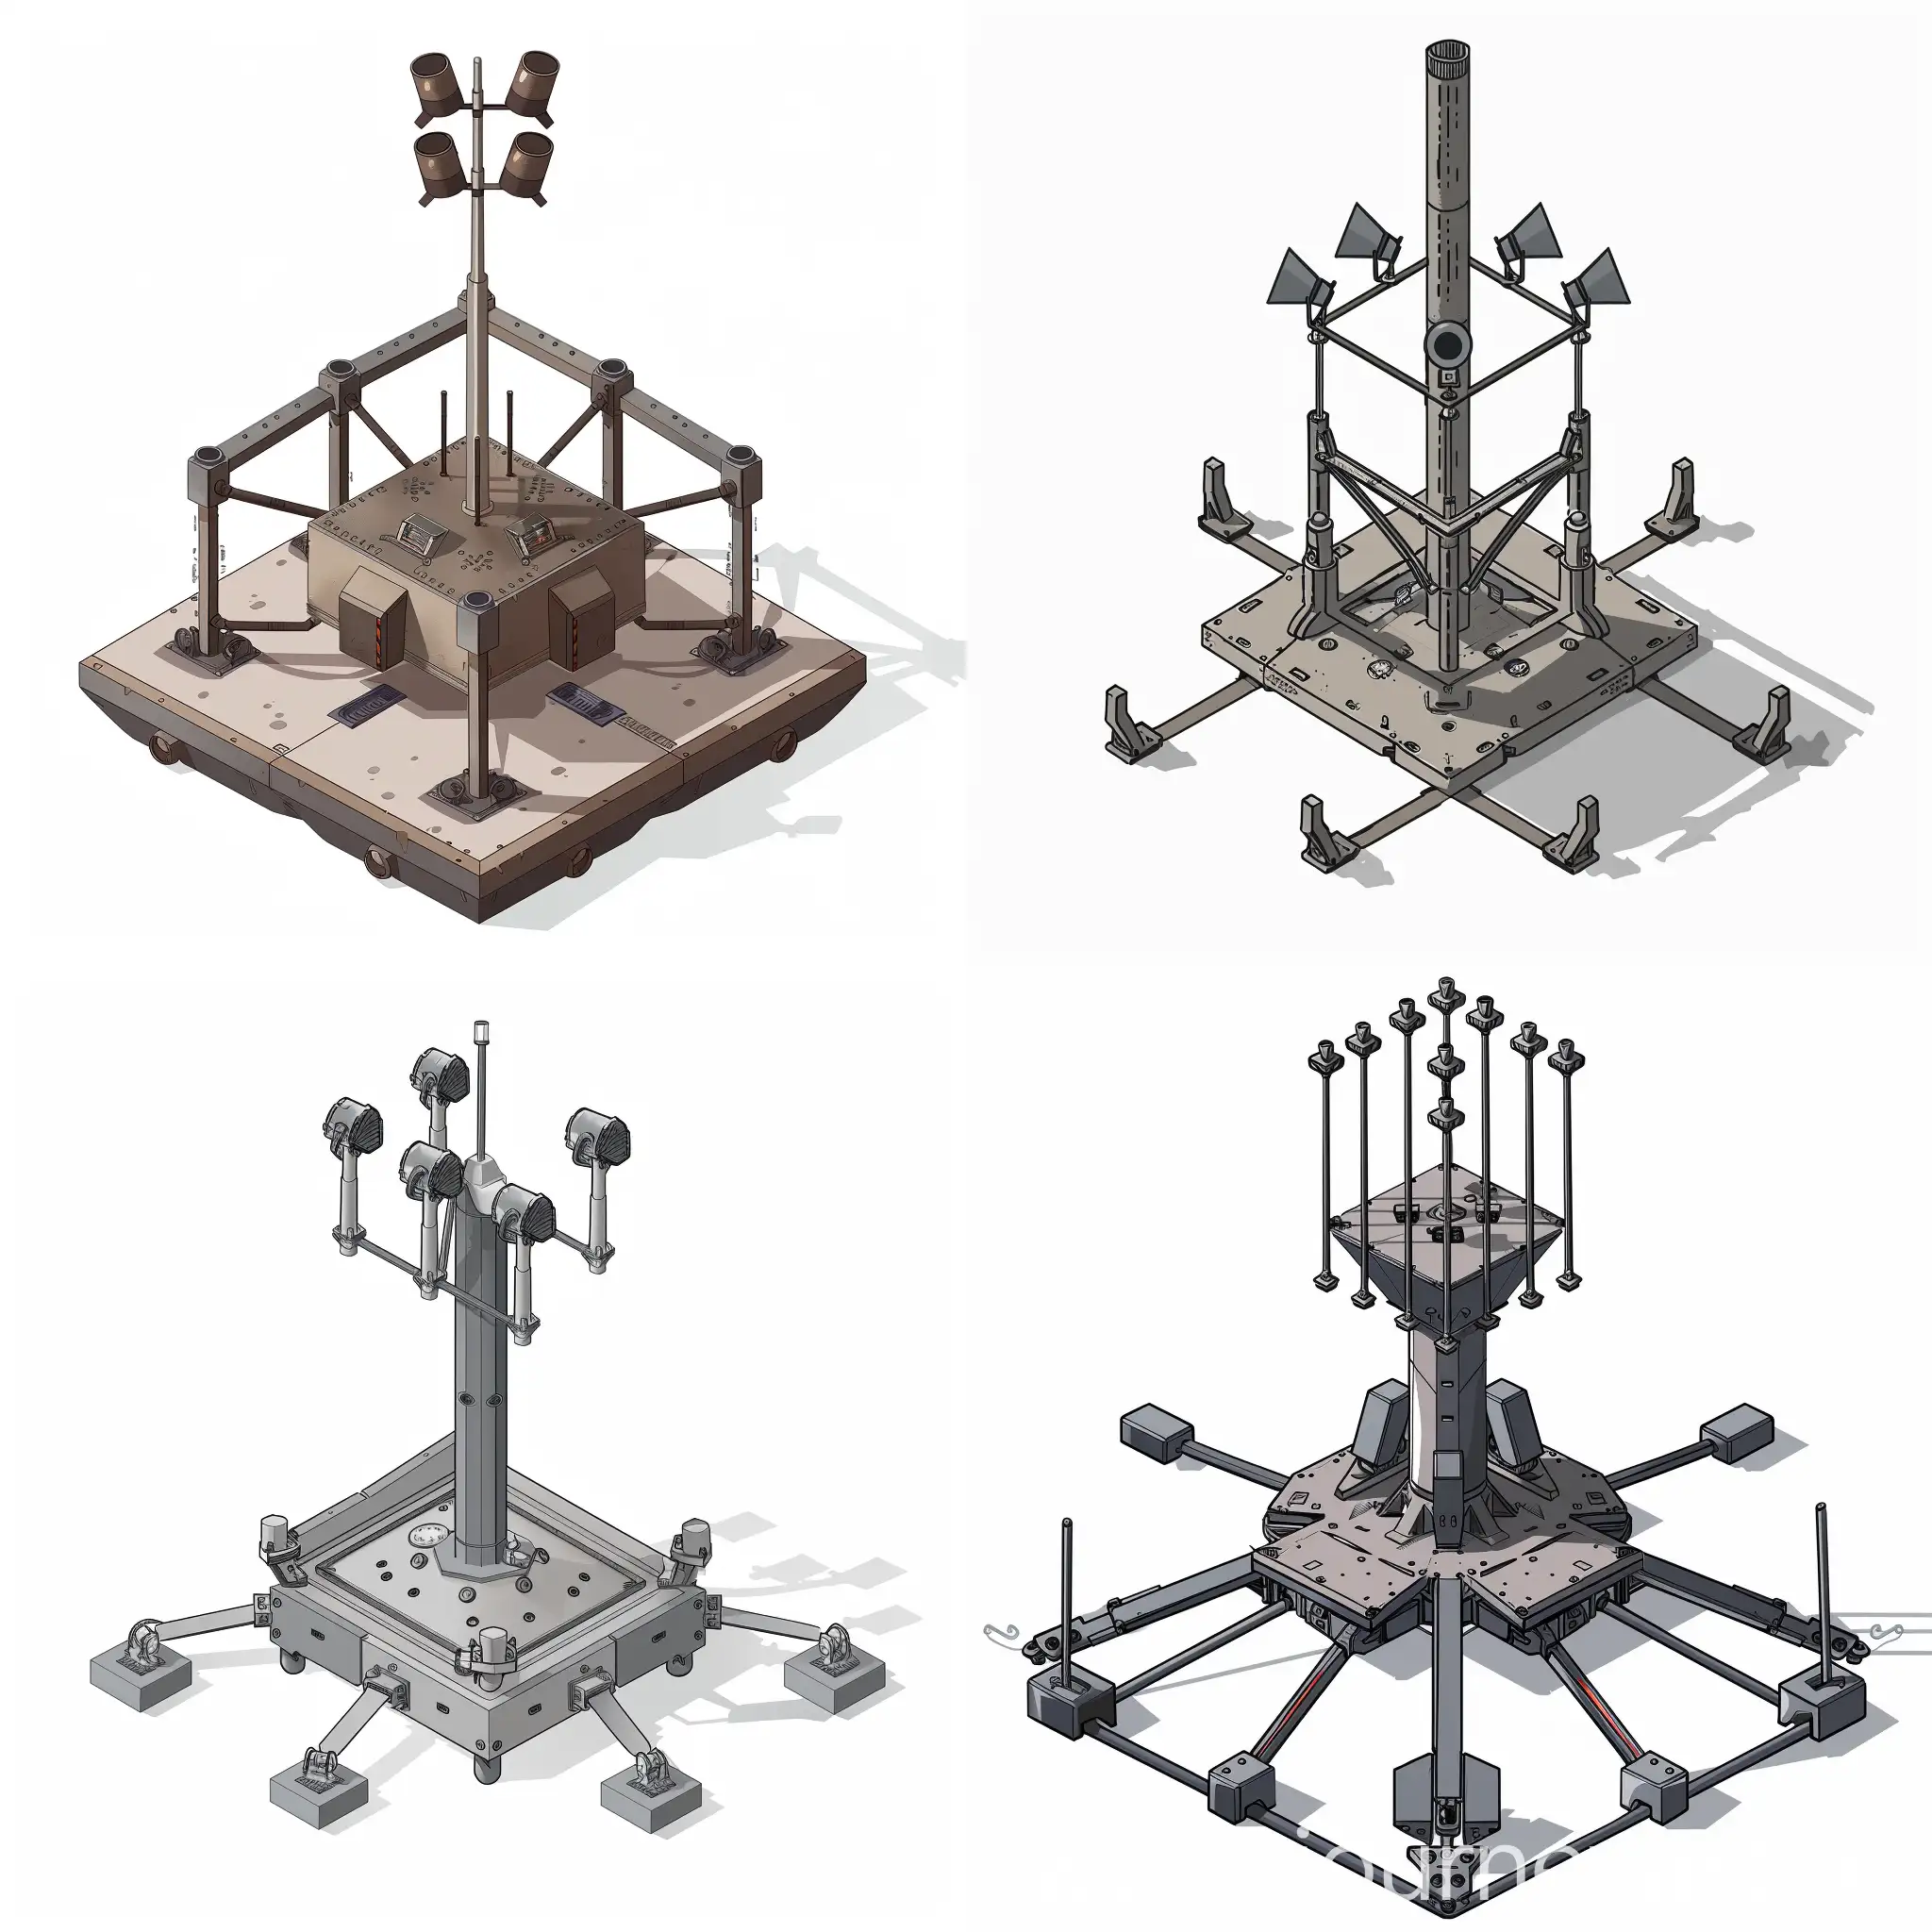 small metallic structure and six metallic arms around the structure for ground support with a pole structure in the center like a mast with a vertical arrangement of sirens horns facing the same direction on the top of the pole, with a vshape front for hauling, simple illustration, stow hauler platform alike, low detail, stencil for Visio, isometric, white background